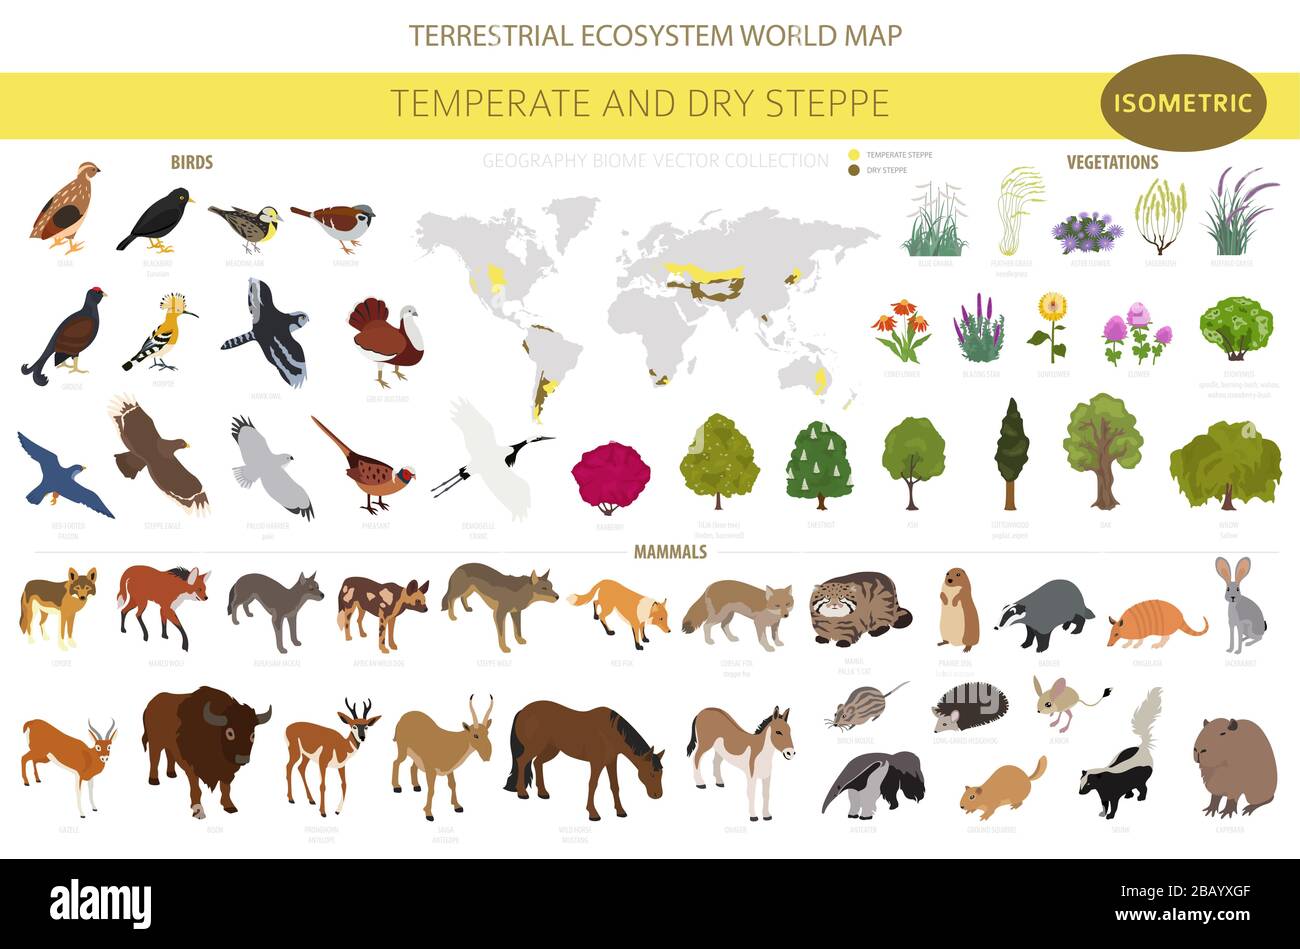 Temperate and dry steppe biome, natural region isometric infographic.  Prarie, steppe, grassland, pampas. Terrestrial ecosystem world map. Animals,  bir Stock Vector Image & Art - Alamy